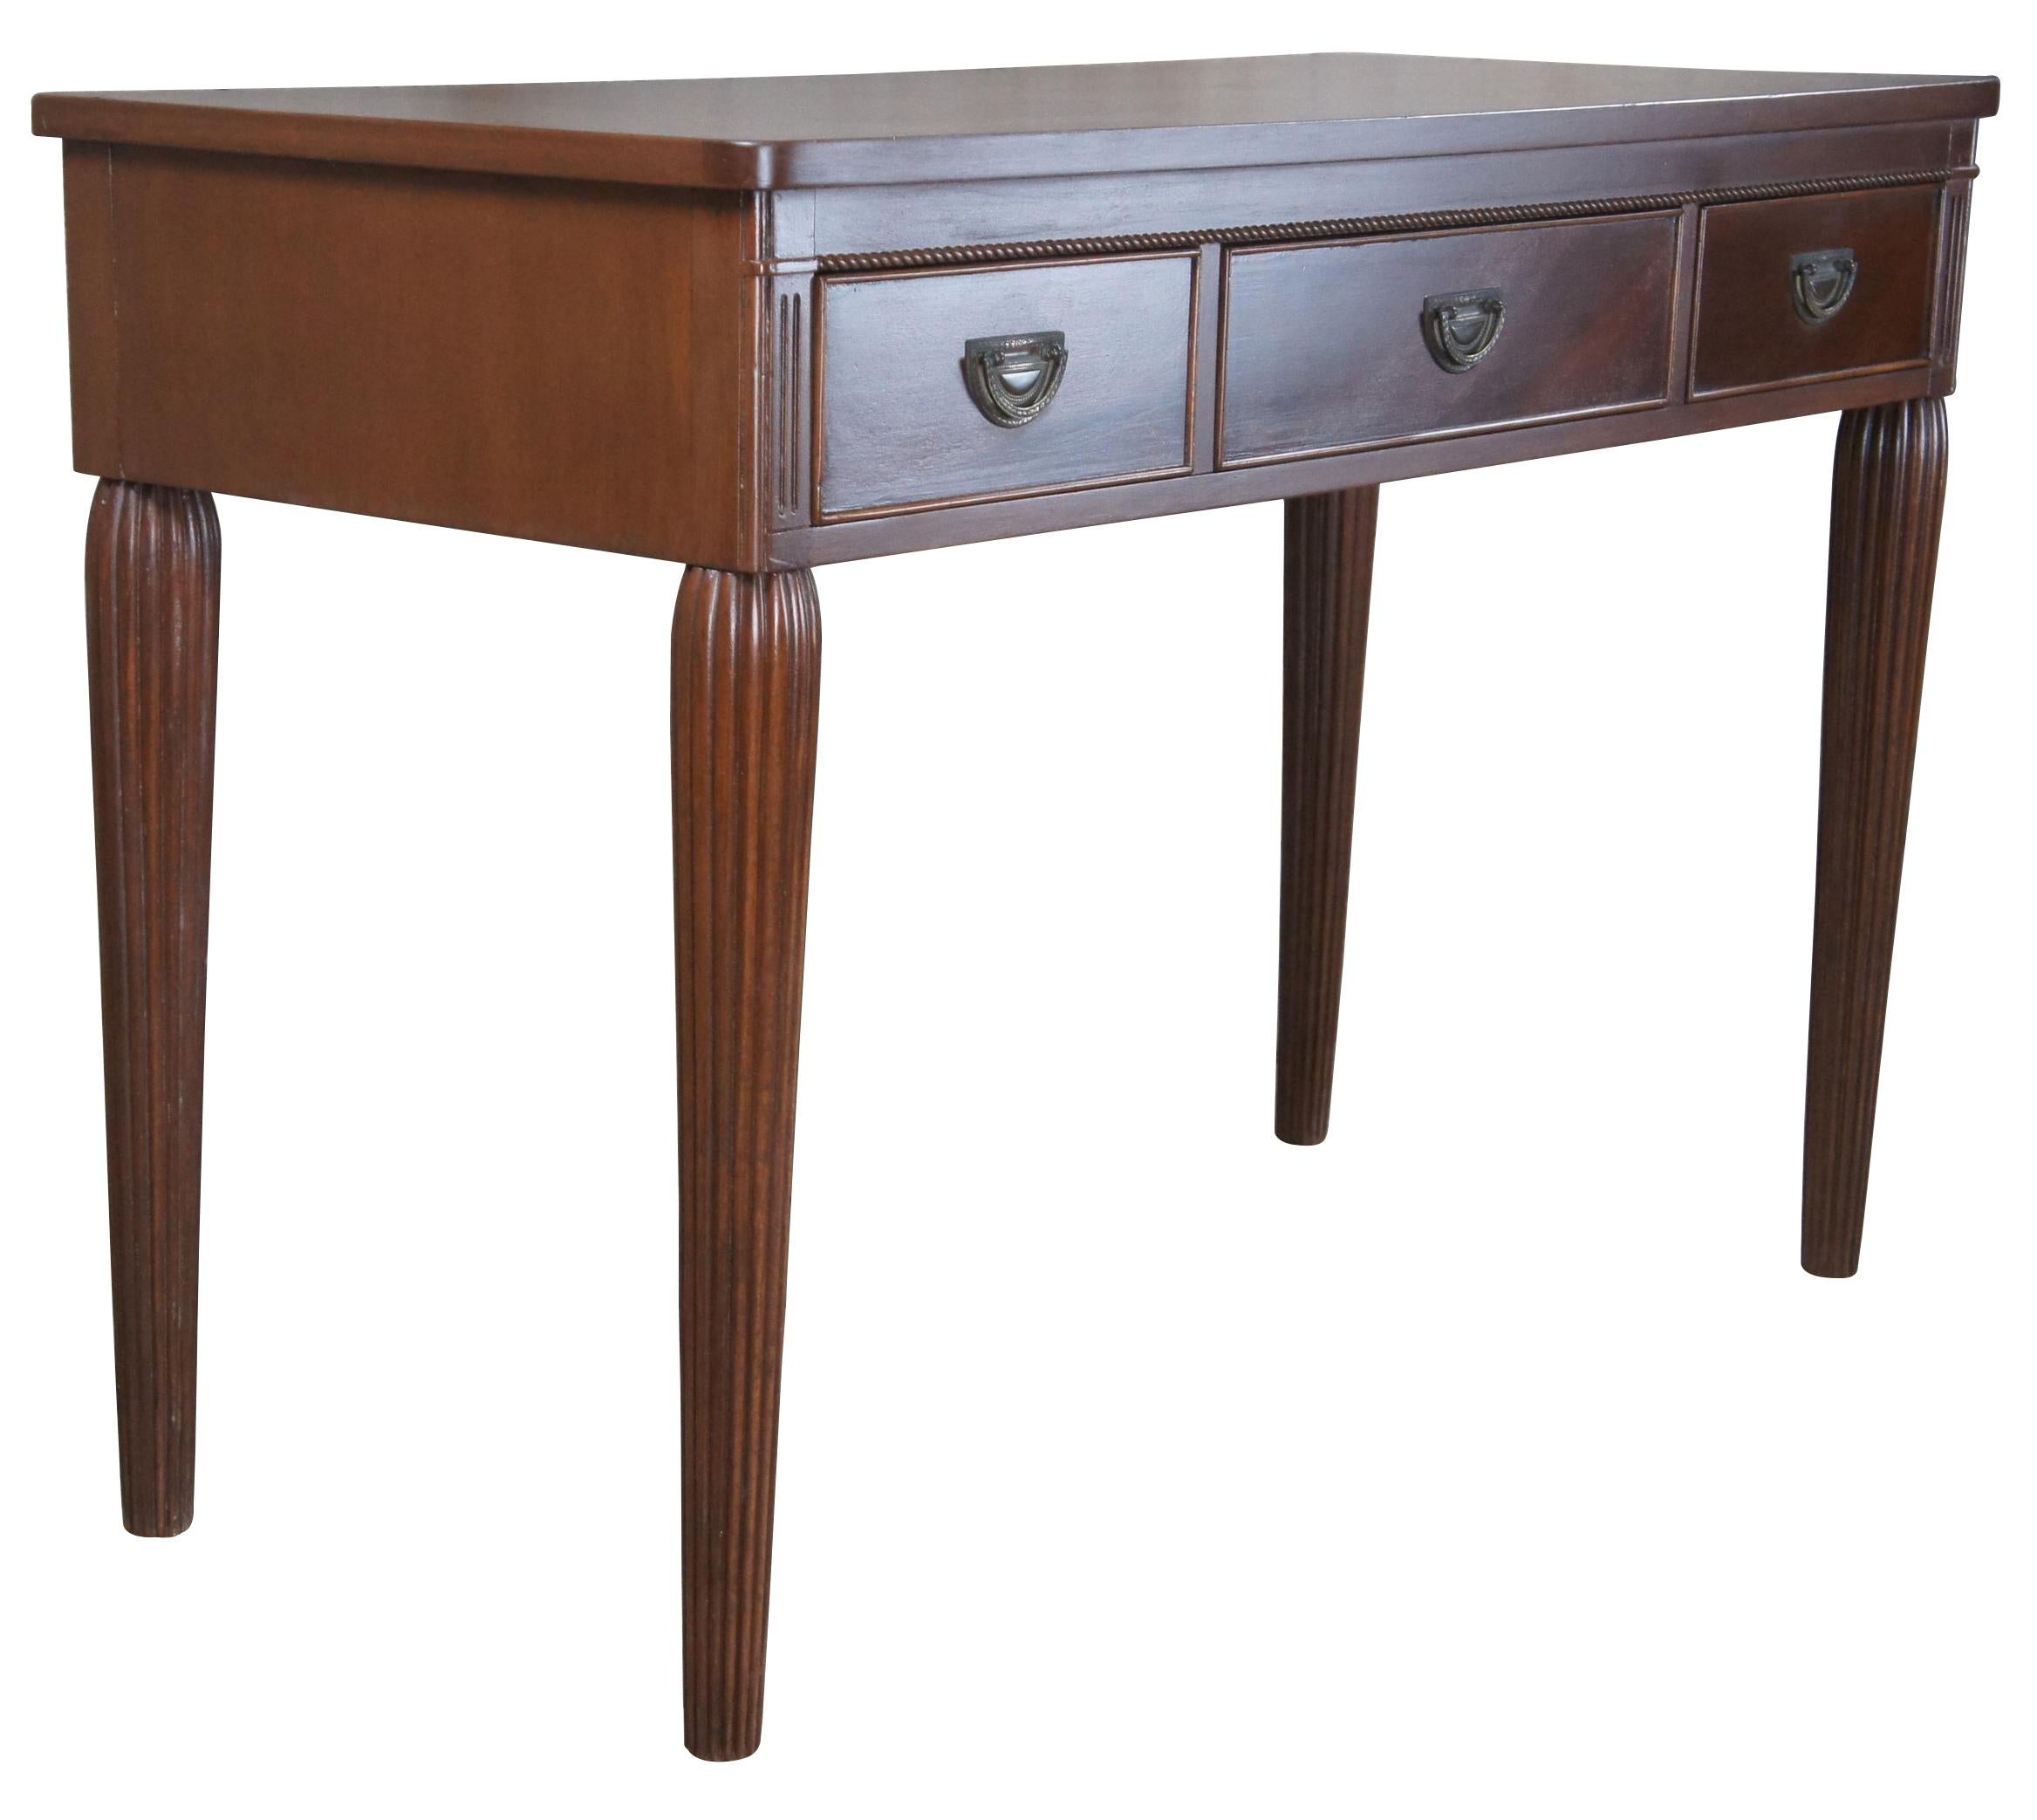 Vintage John Wanamaker library writing desk. Made of mahogany featuring rectangular form with three brass art deco hardware drawers and fluted tapered legs.

John Wanamaker Department Store was one of the first department stores in the United